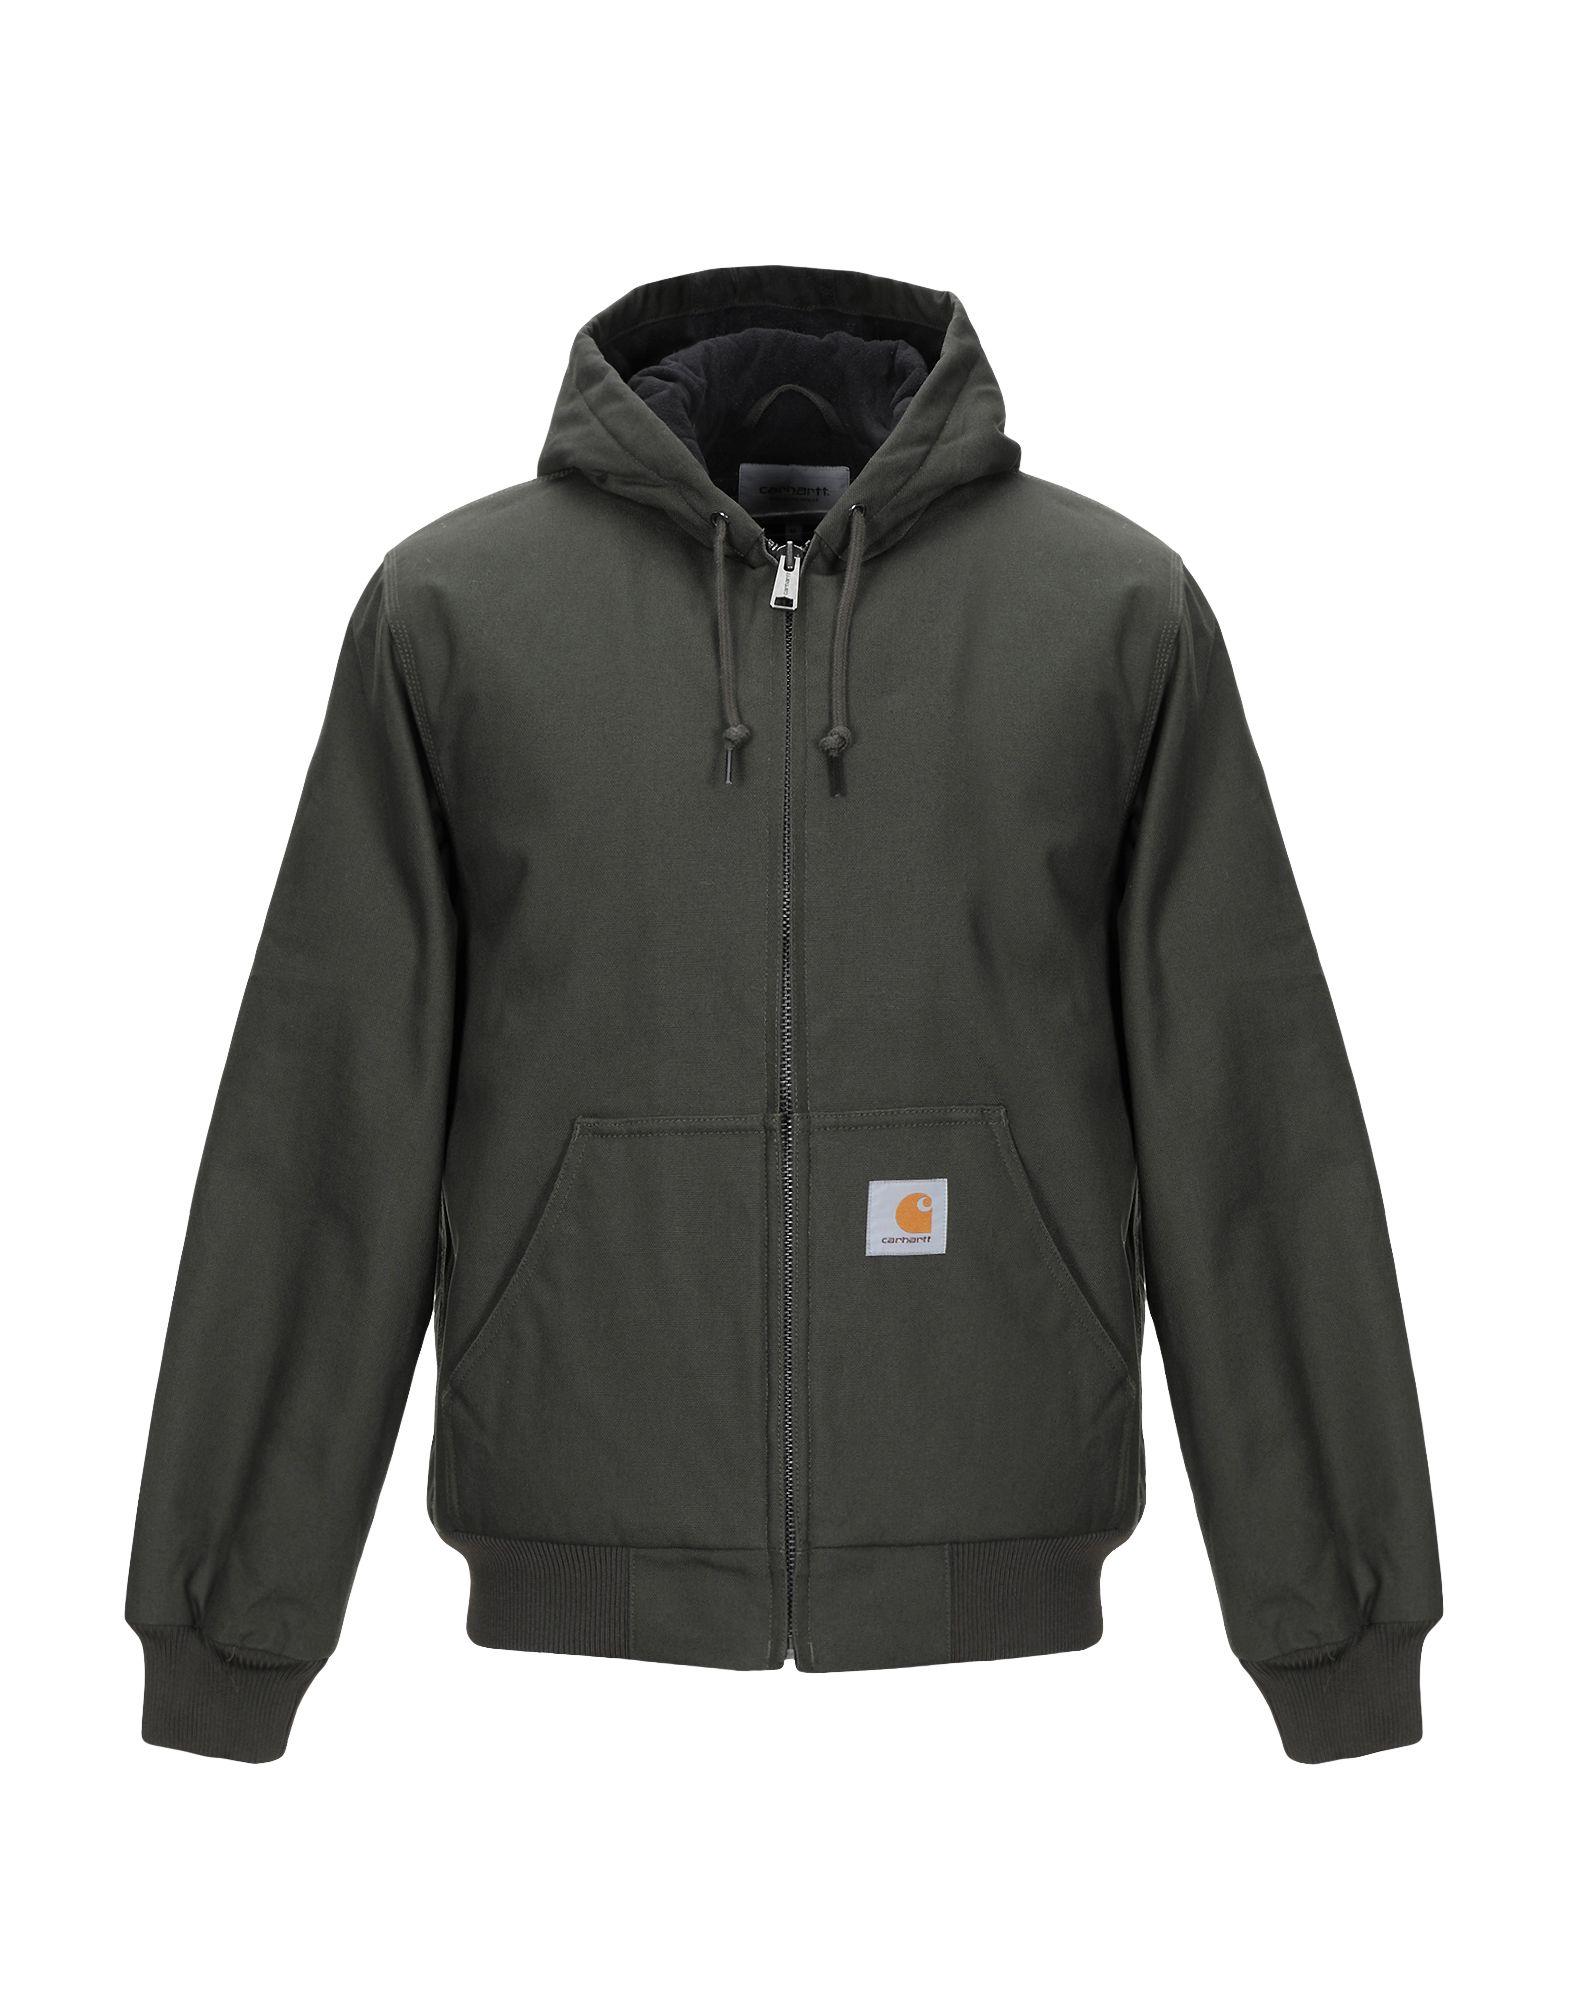 Carhartt Canvas Jacket in Military Green (Green) for Men - Lyst